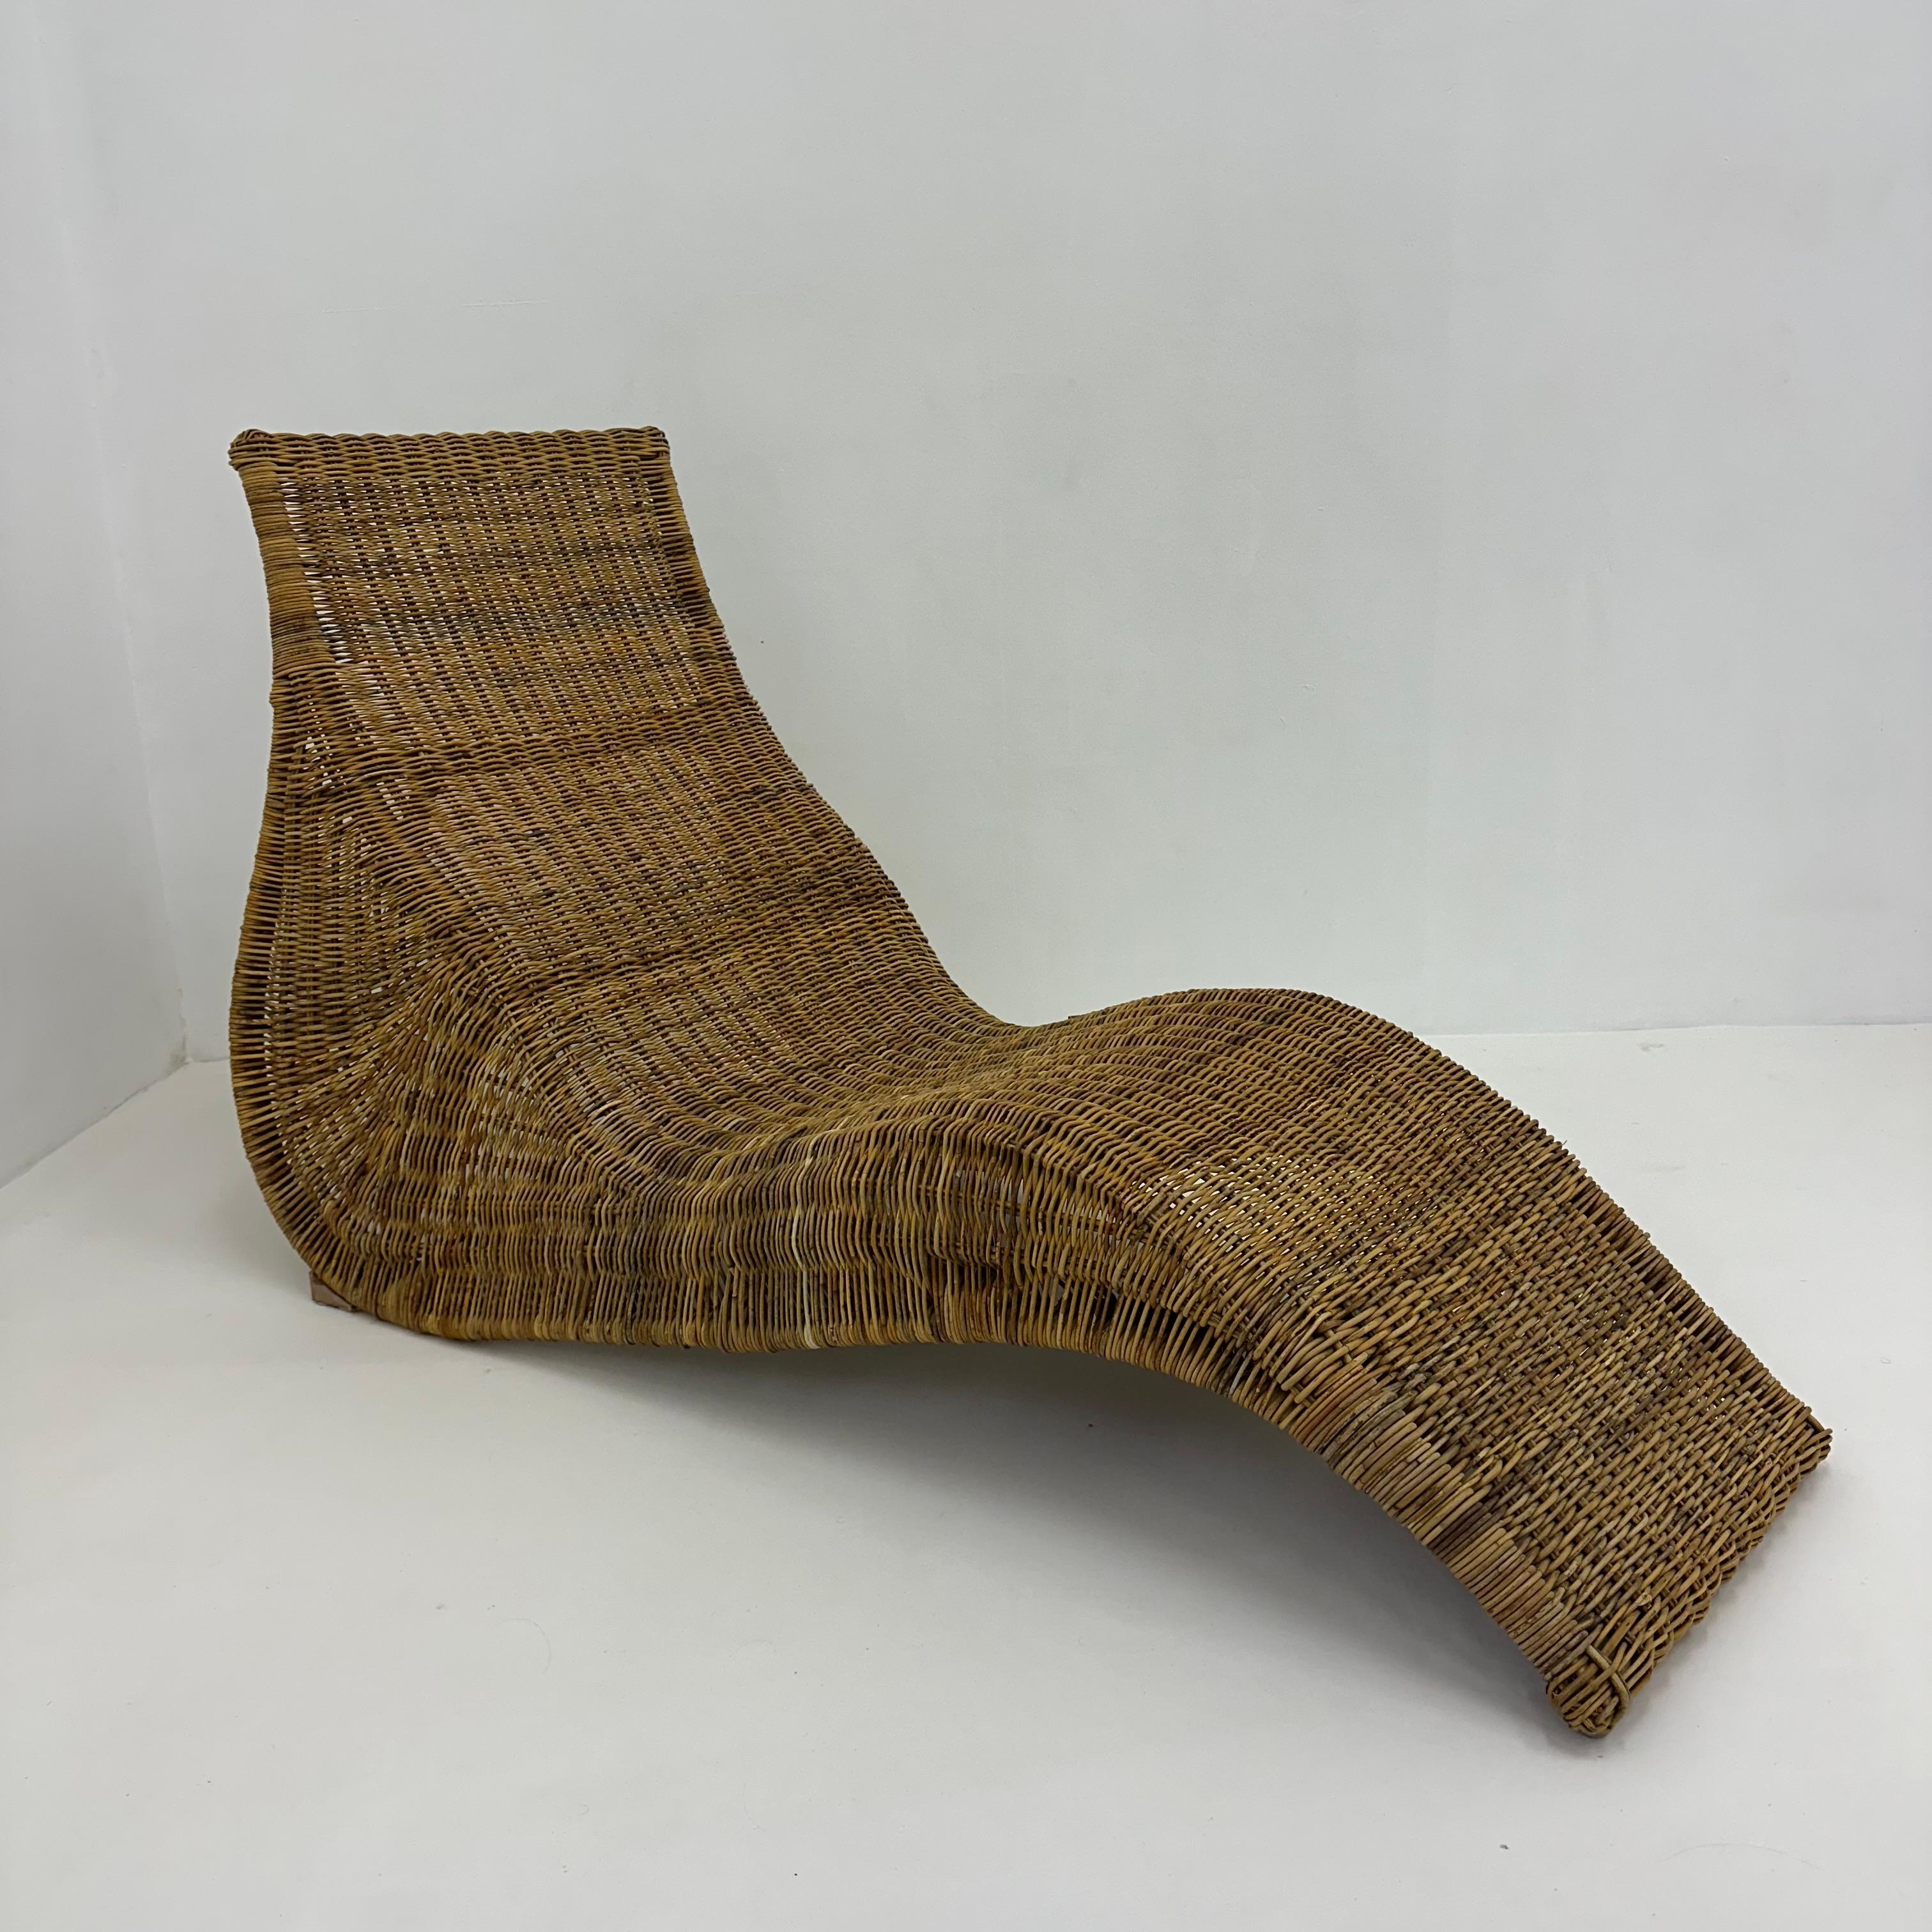 Vintage Karlskrona wicker lounge chair by Karlm Malmvell for Ikea 1998 For Sale 3